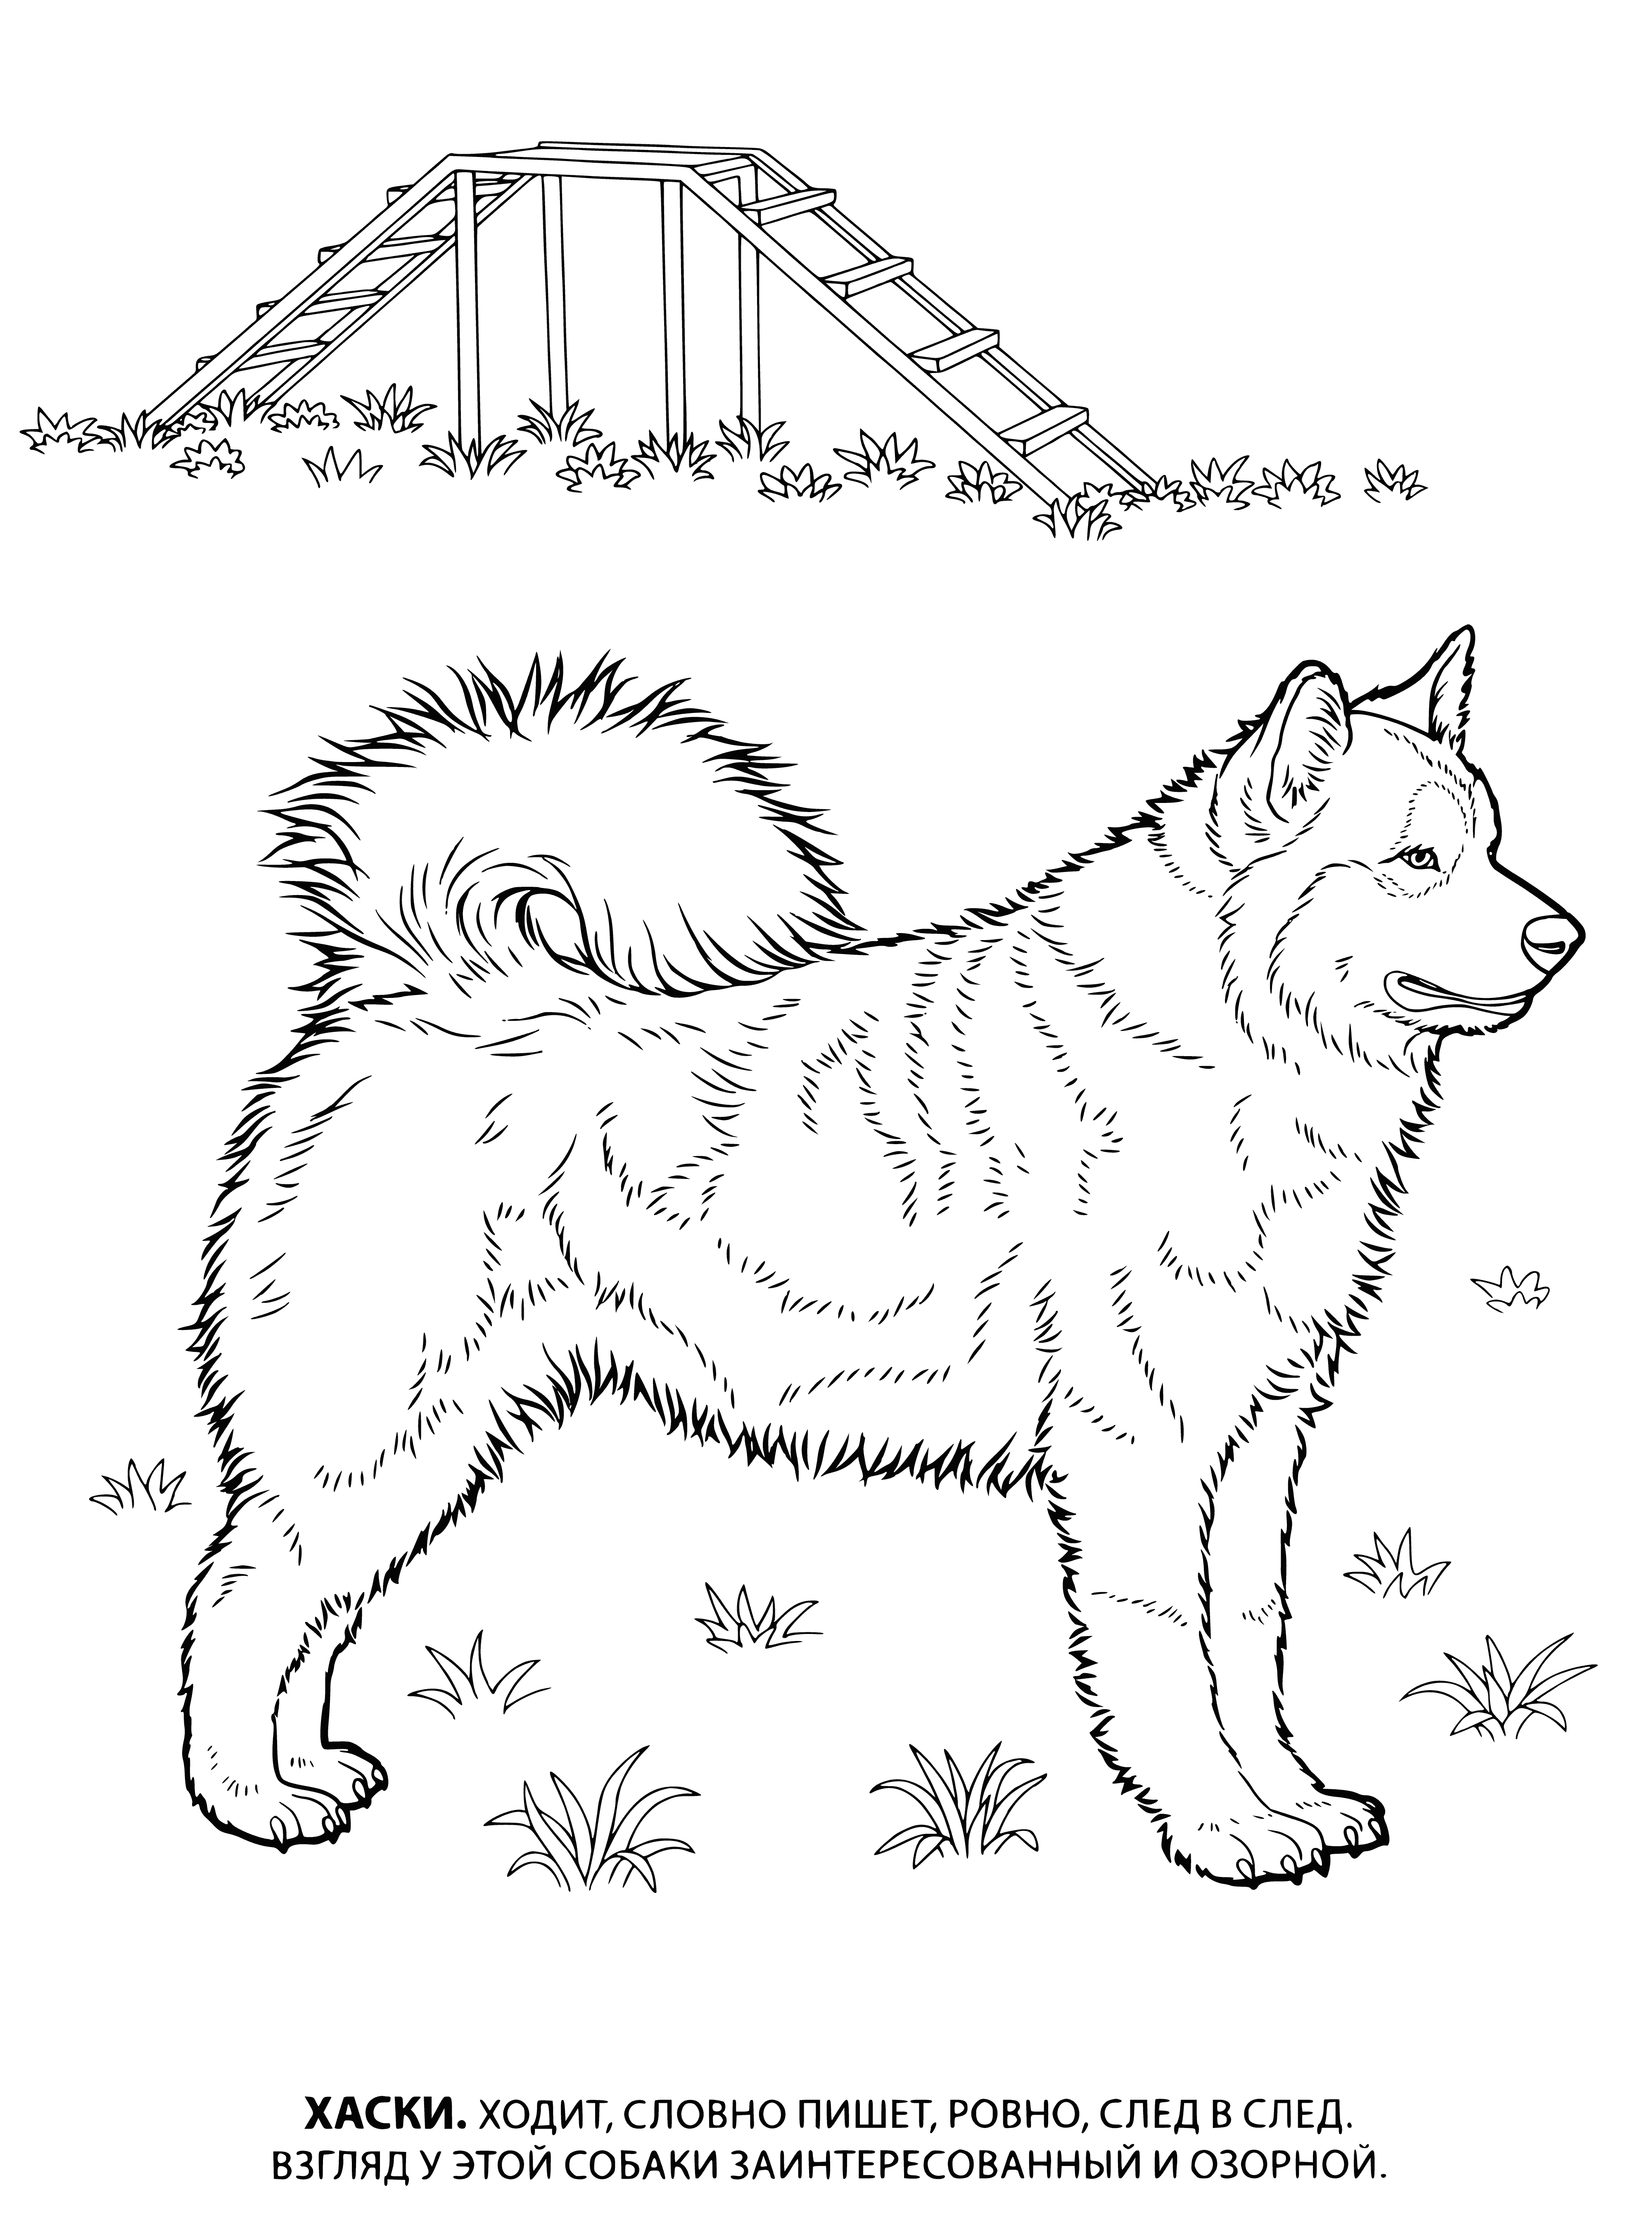 coloring page: Huskies are large working & pet dogs w/ thick coats of fur, usually white but also black, brown, or gray. Originating in Siberia, they are now popular in cold places like Alaska.